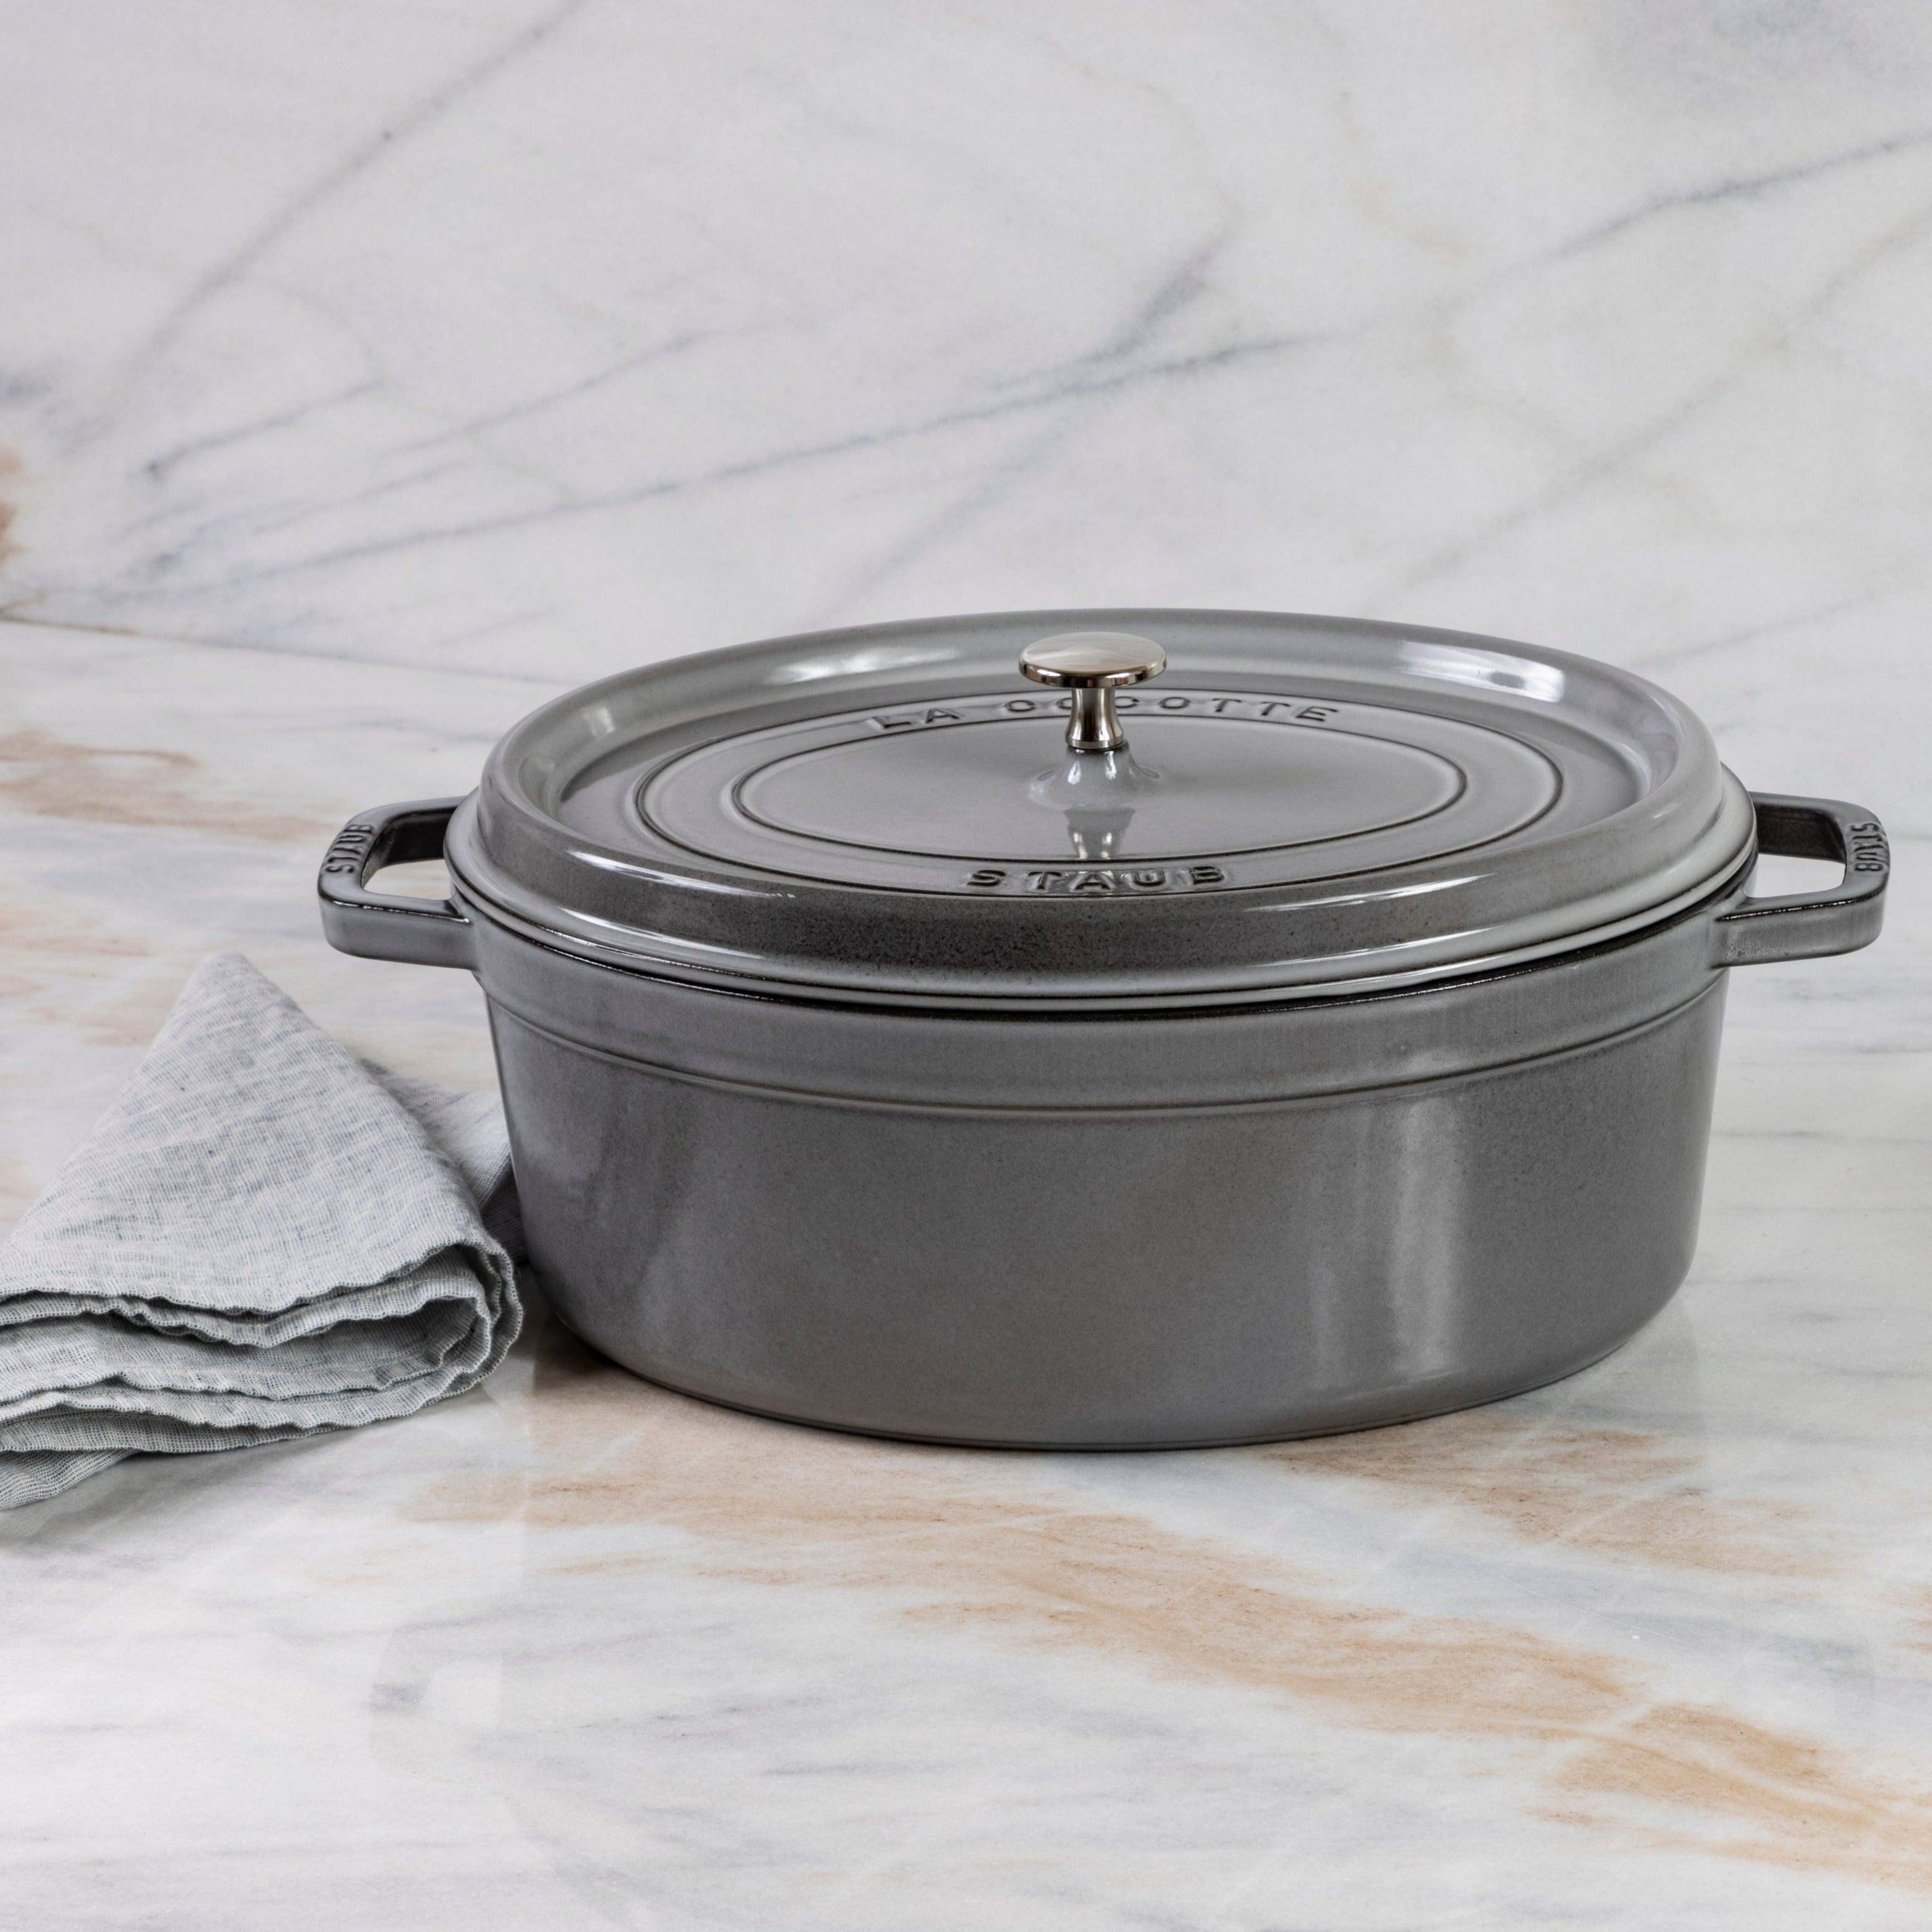 Staub Oval Cocotte, 7qt, Graphite Grey – Be Home